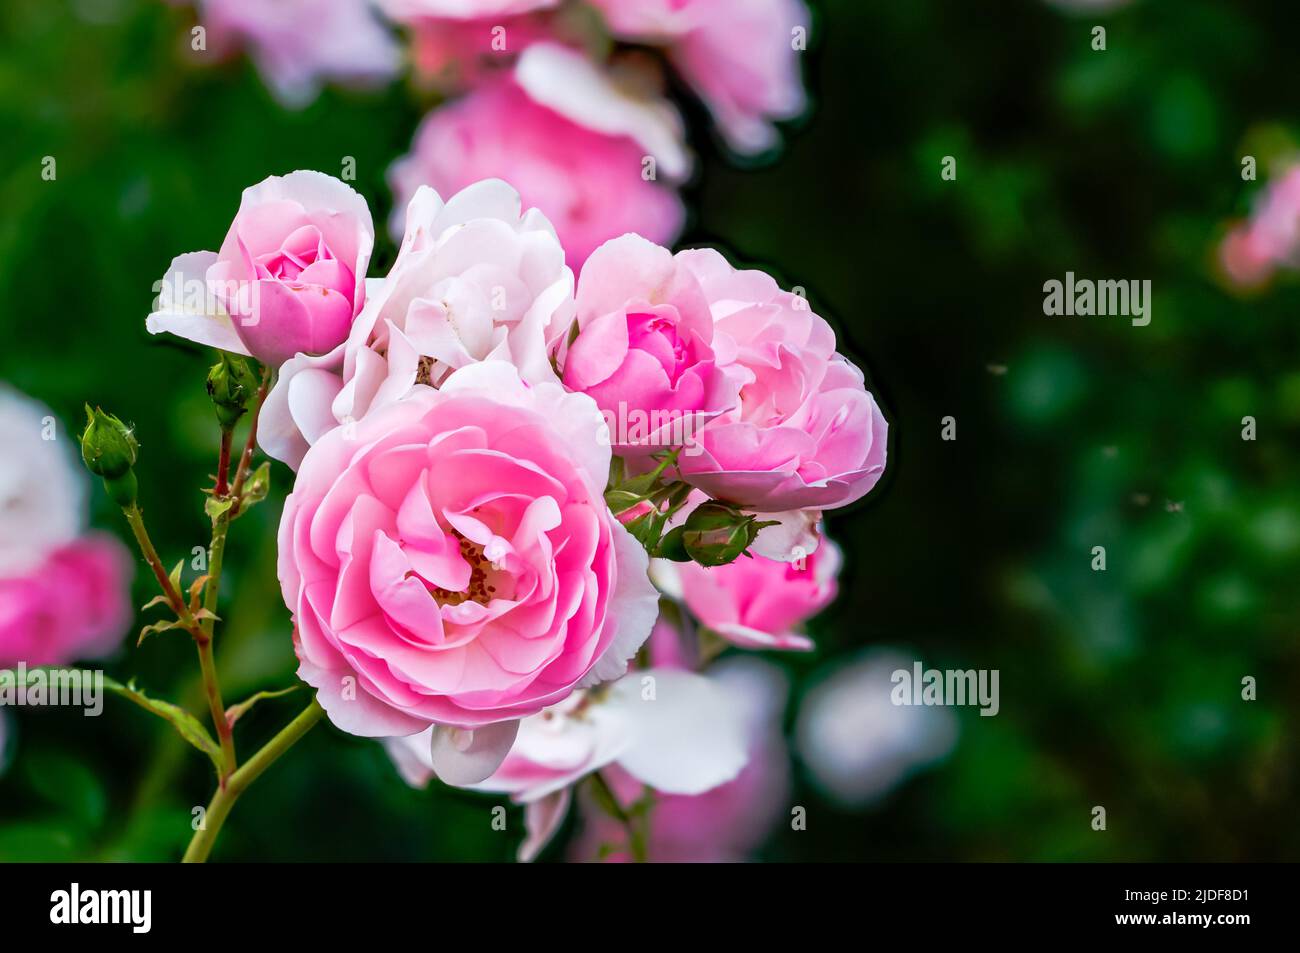 English rose, multi-flowered pink flower bouquets from close range Stock Photo